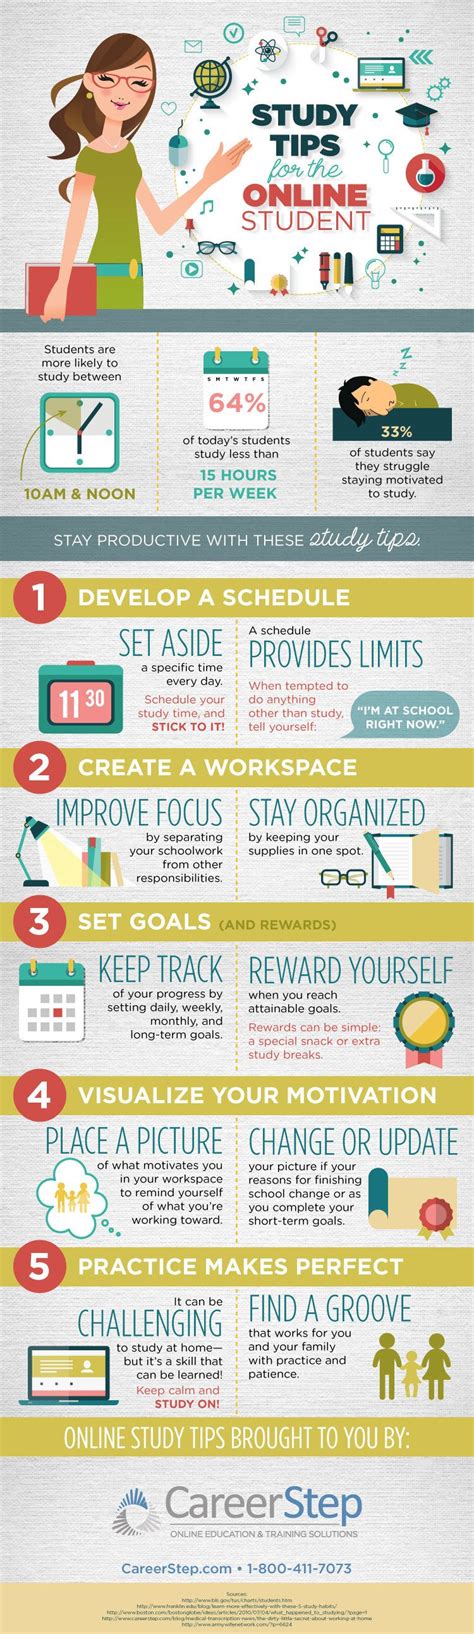 5 Great Study Tips For Online Students Infographic E Learning